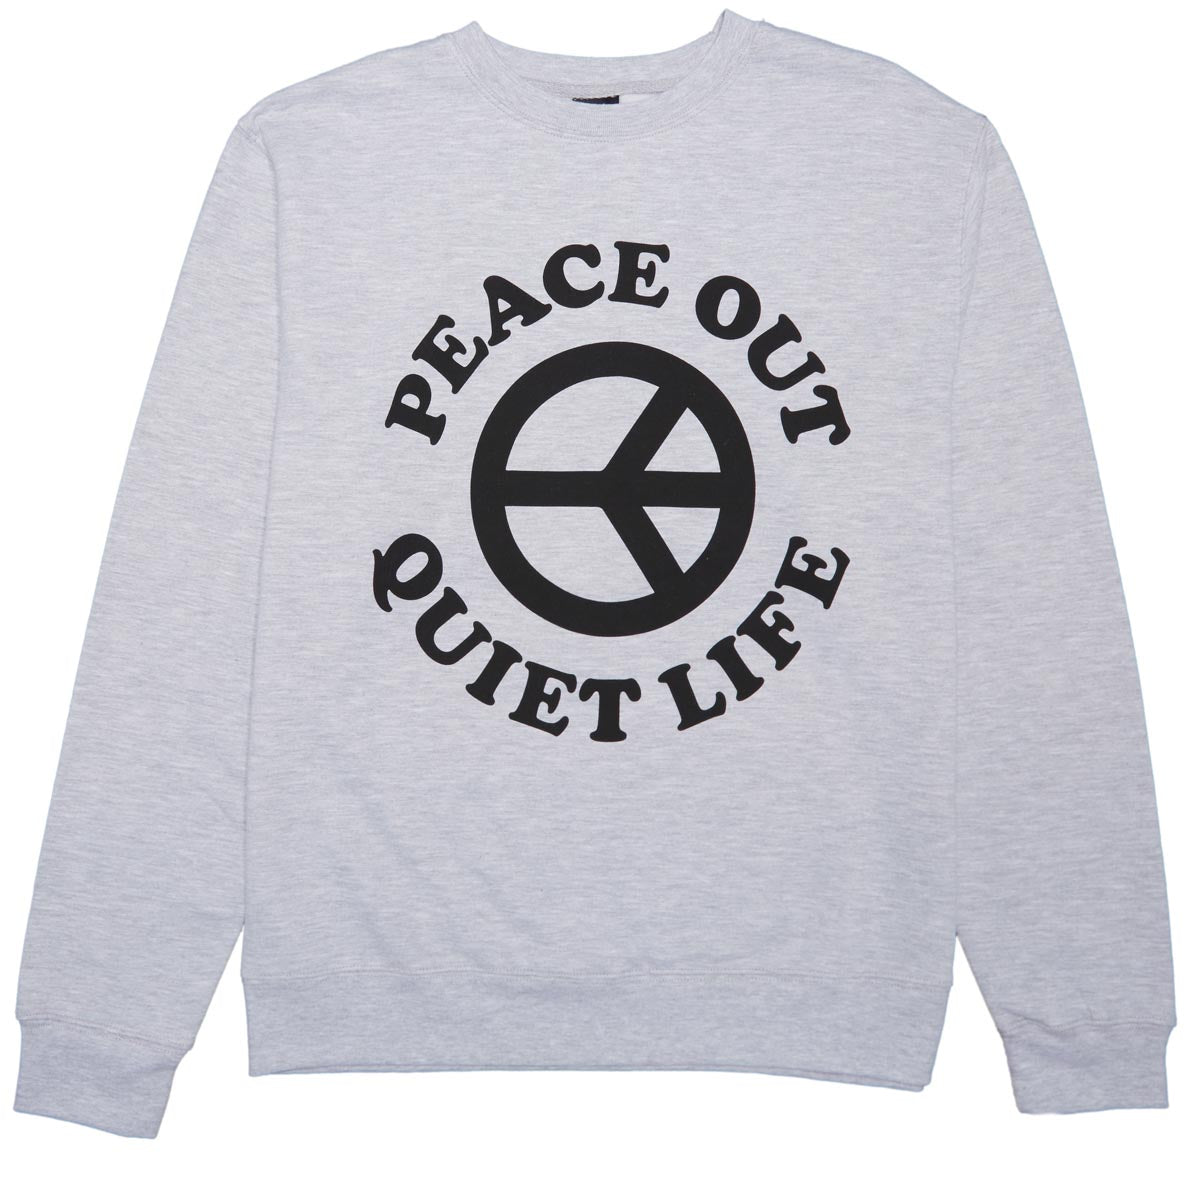 The Quiet Life Peace Out Crewneck Sweatshirt - Athletic Heather image 1